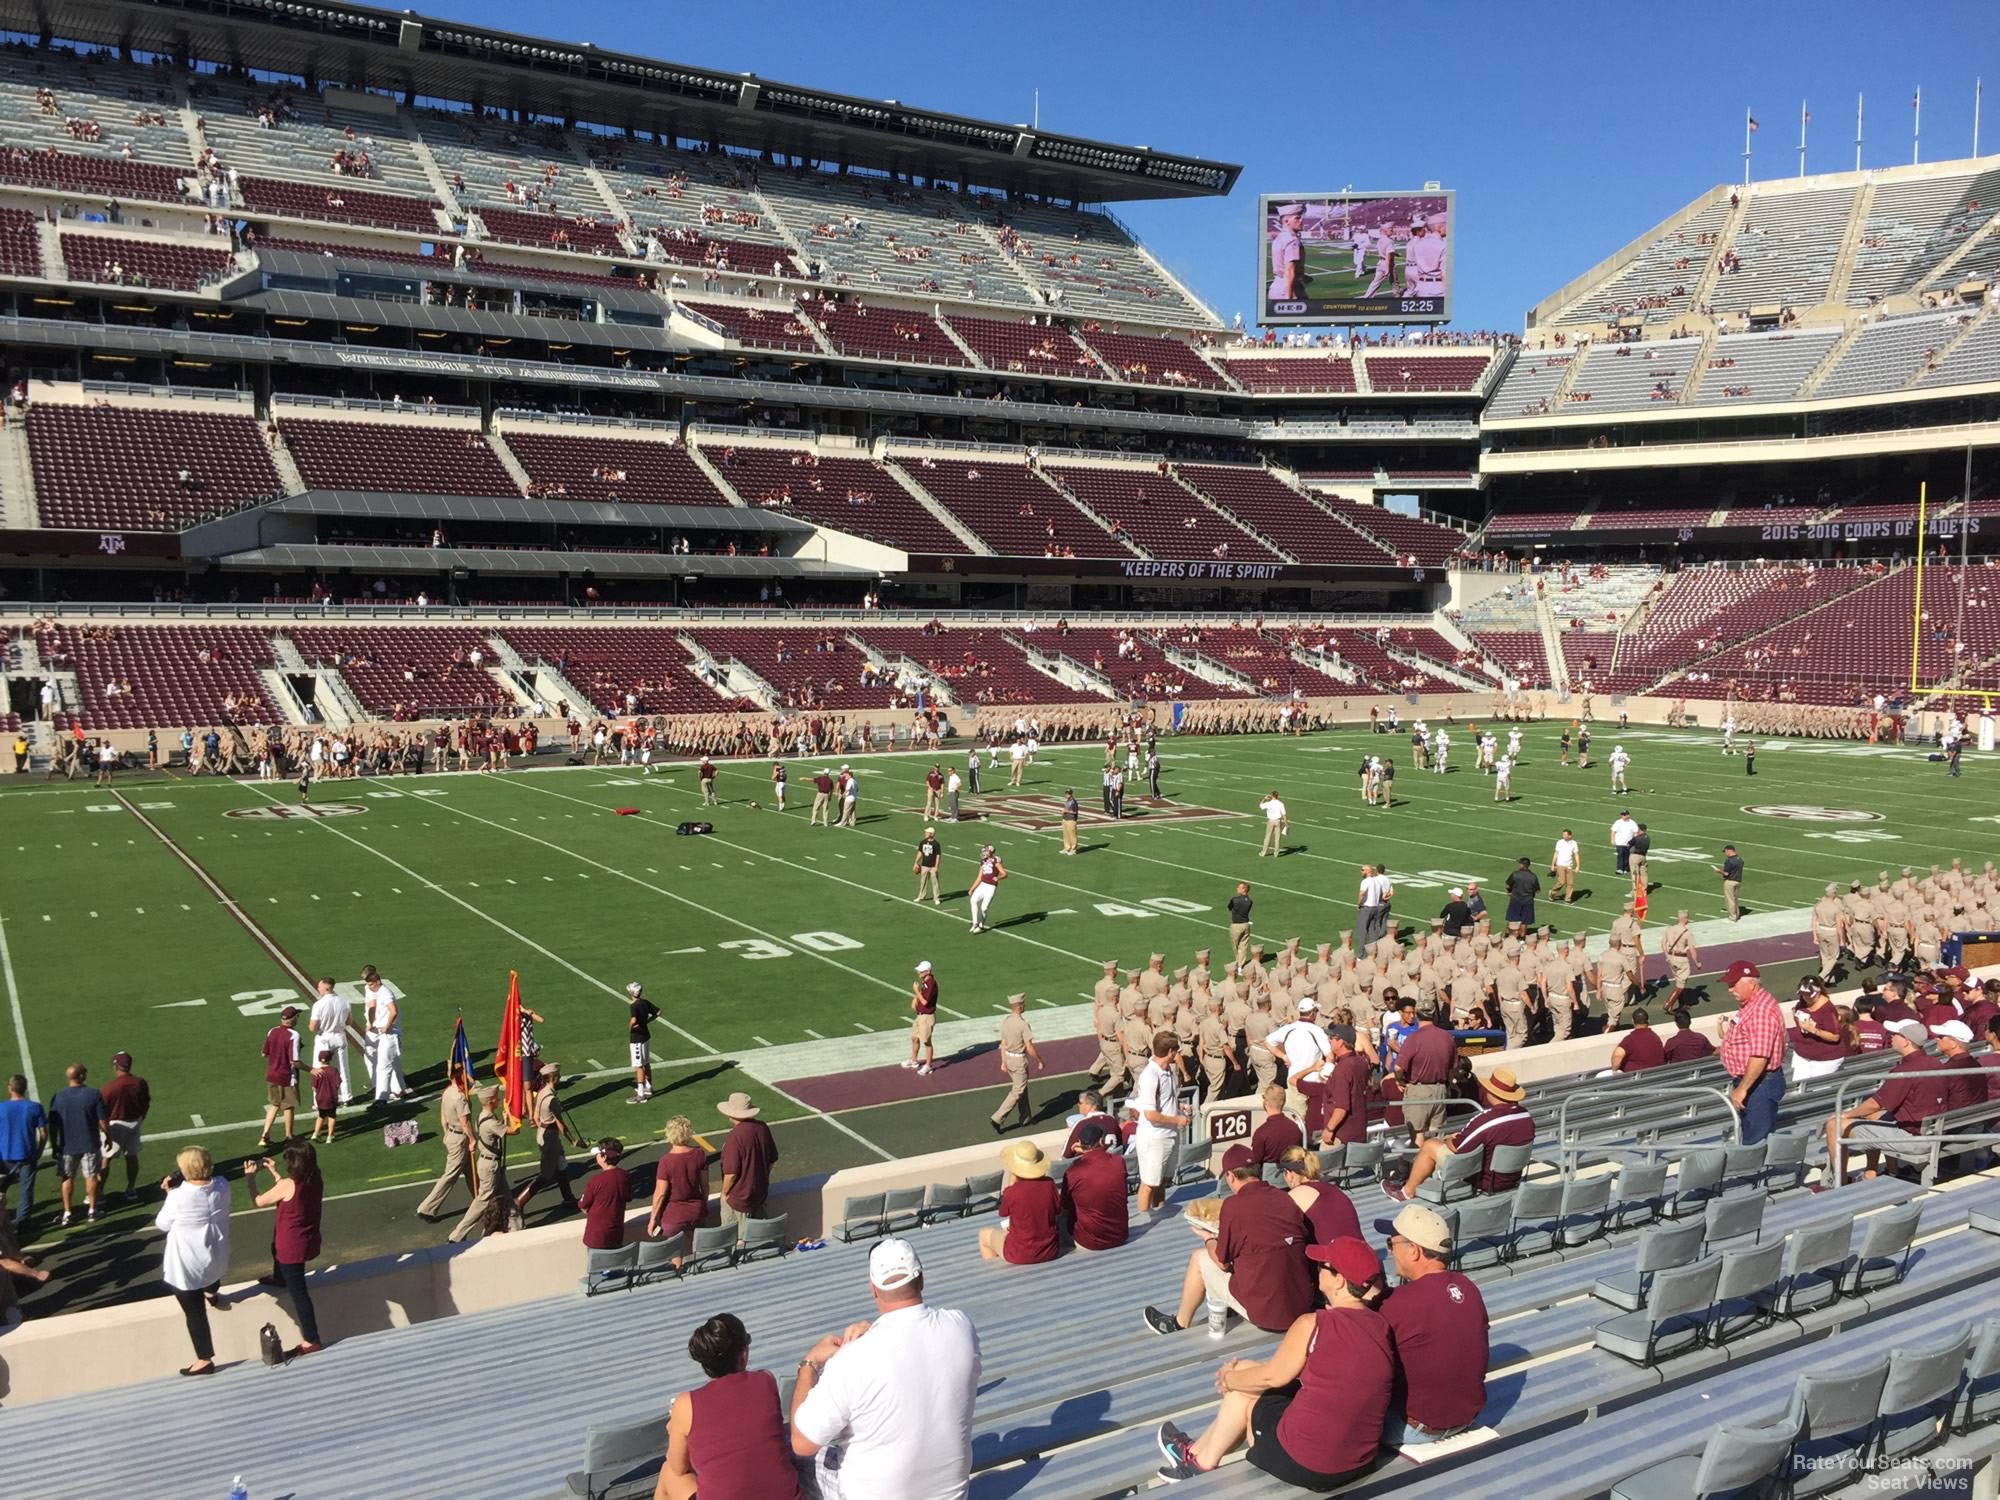 section 127, row 20 seat view  - kyle field